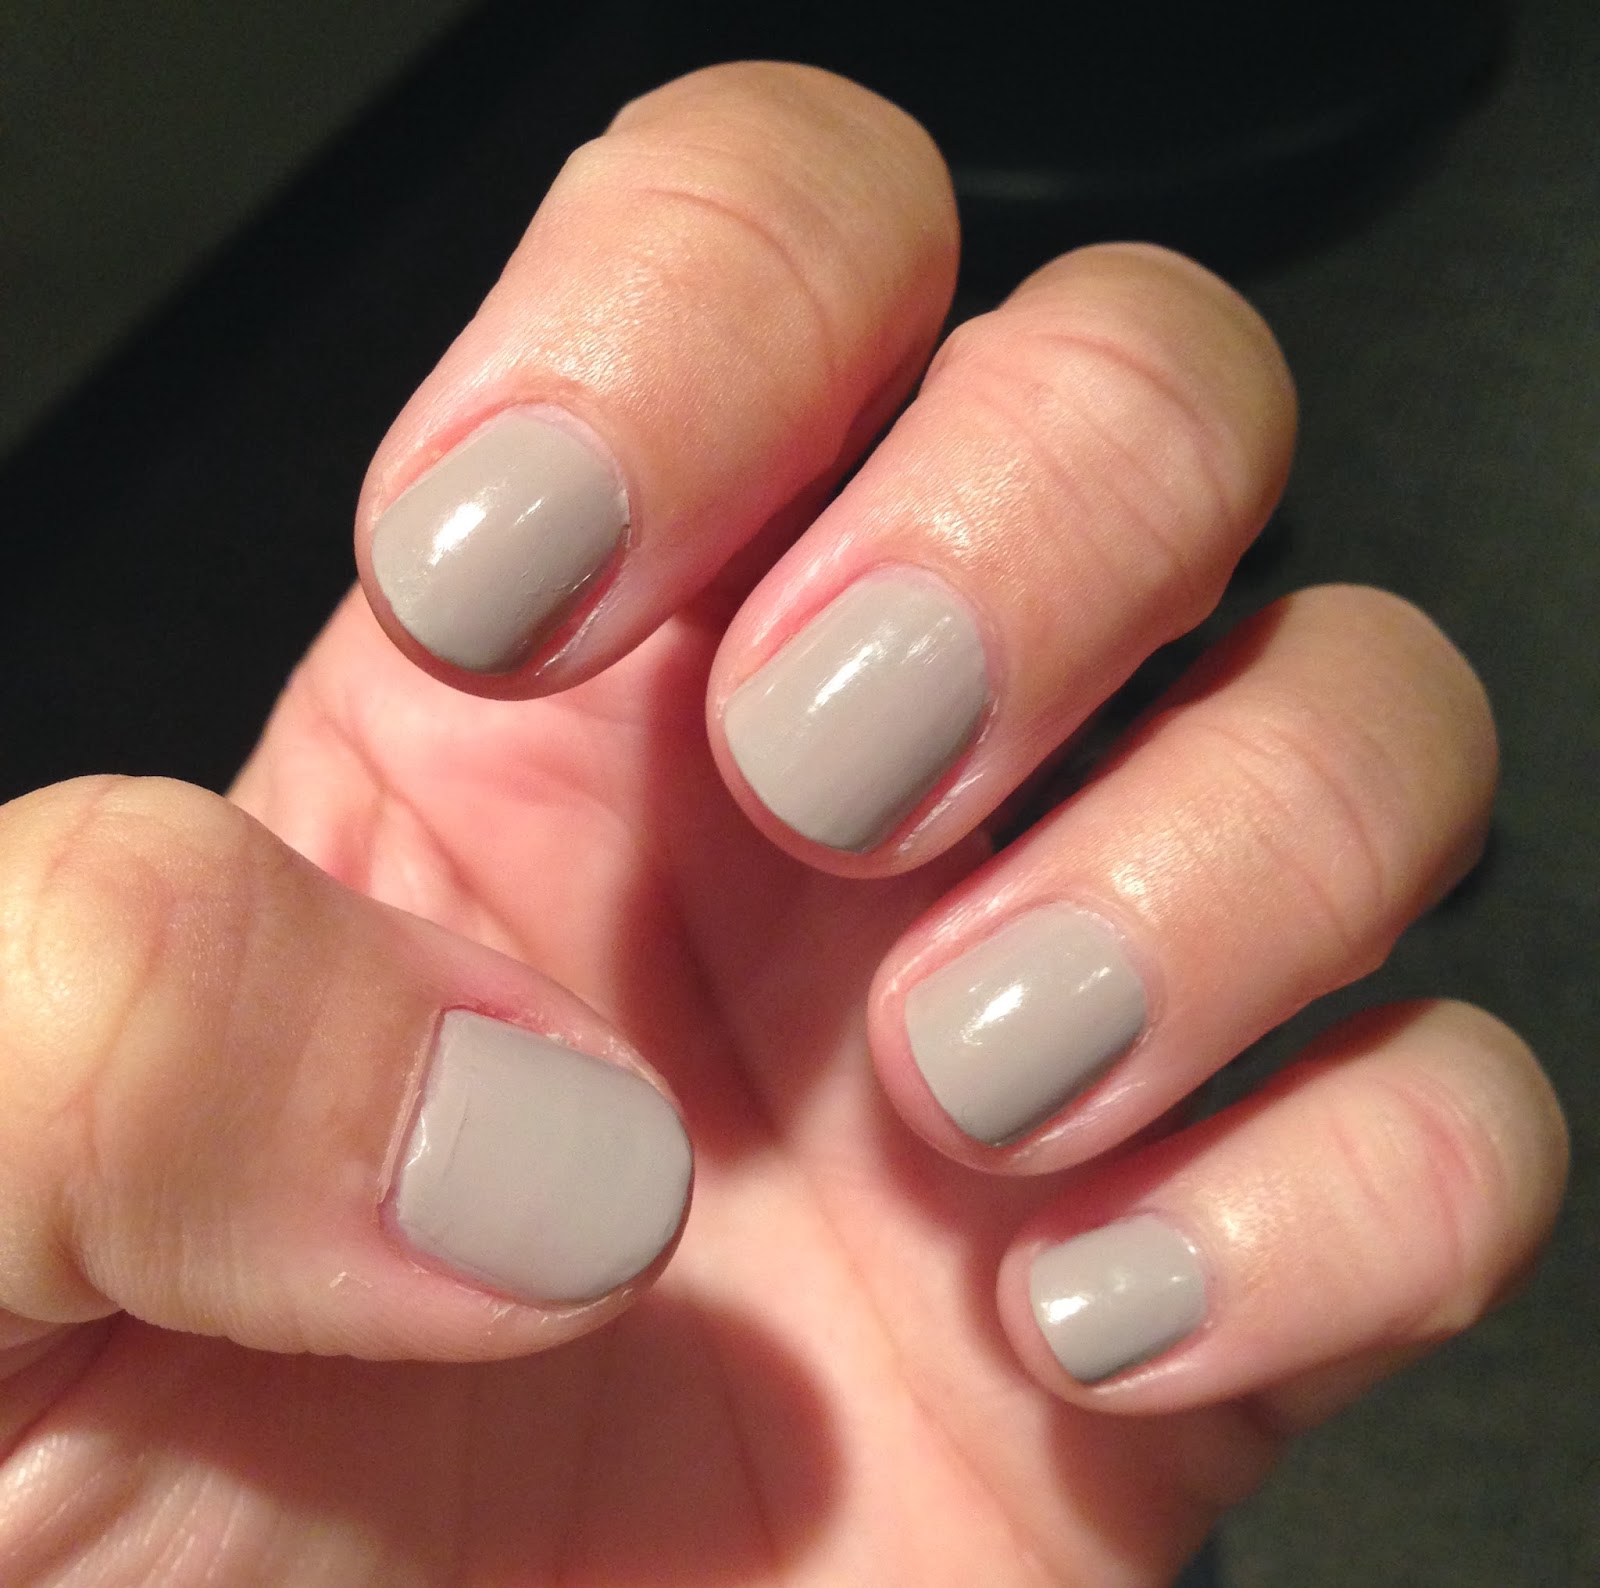 My Beauty Full Blog: Nails Inc Porchester Square Gel Effect